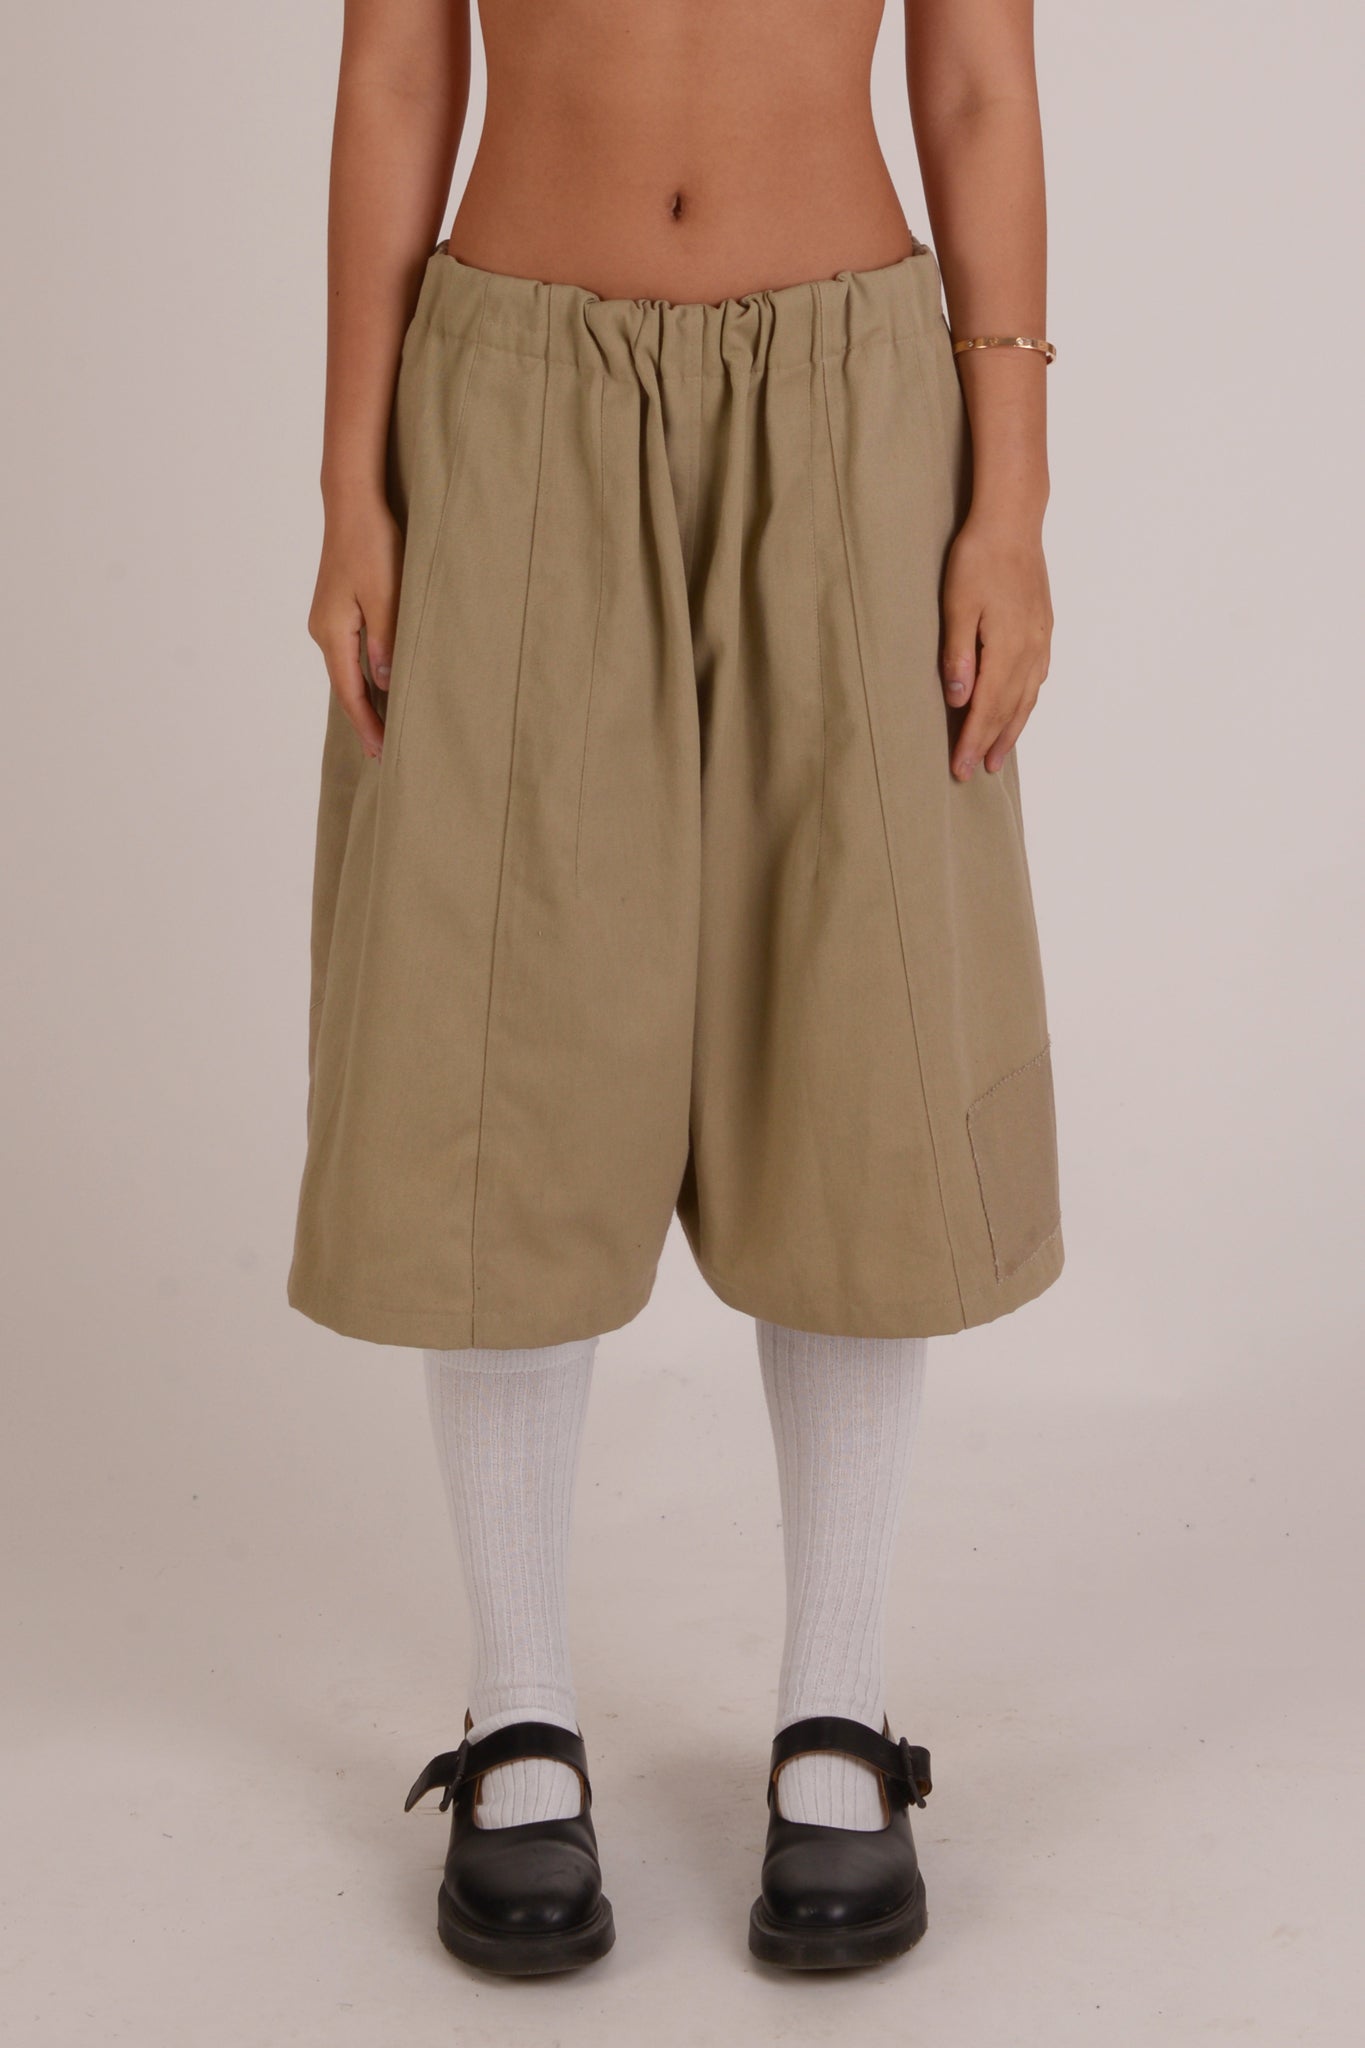 The Shorts - Beige